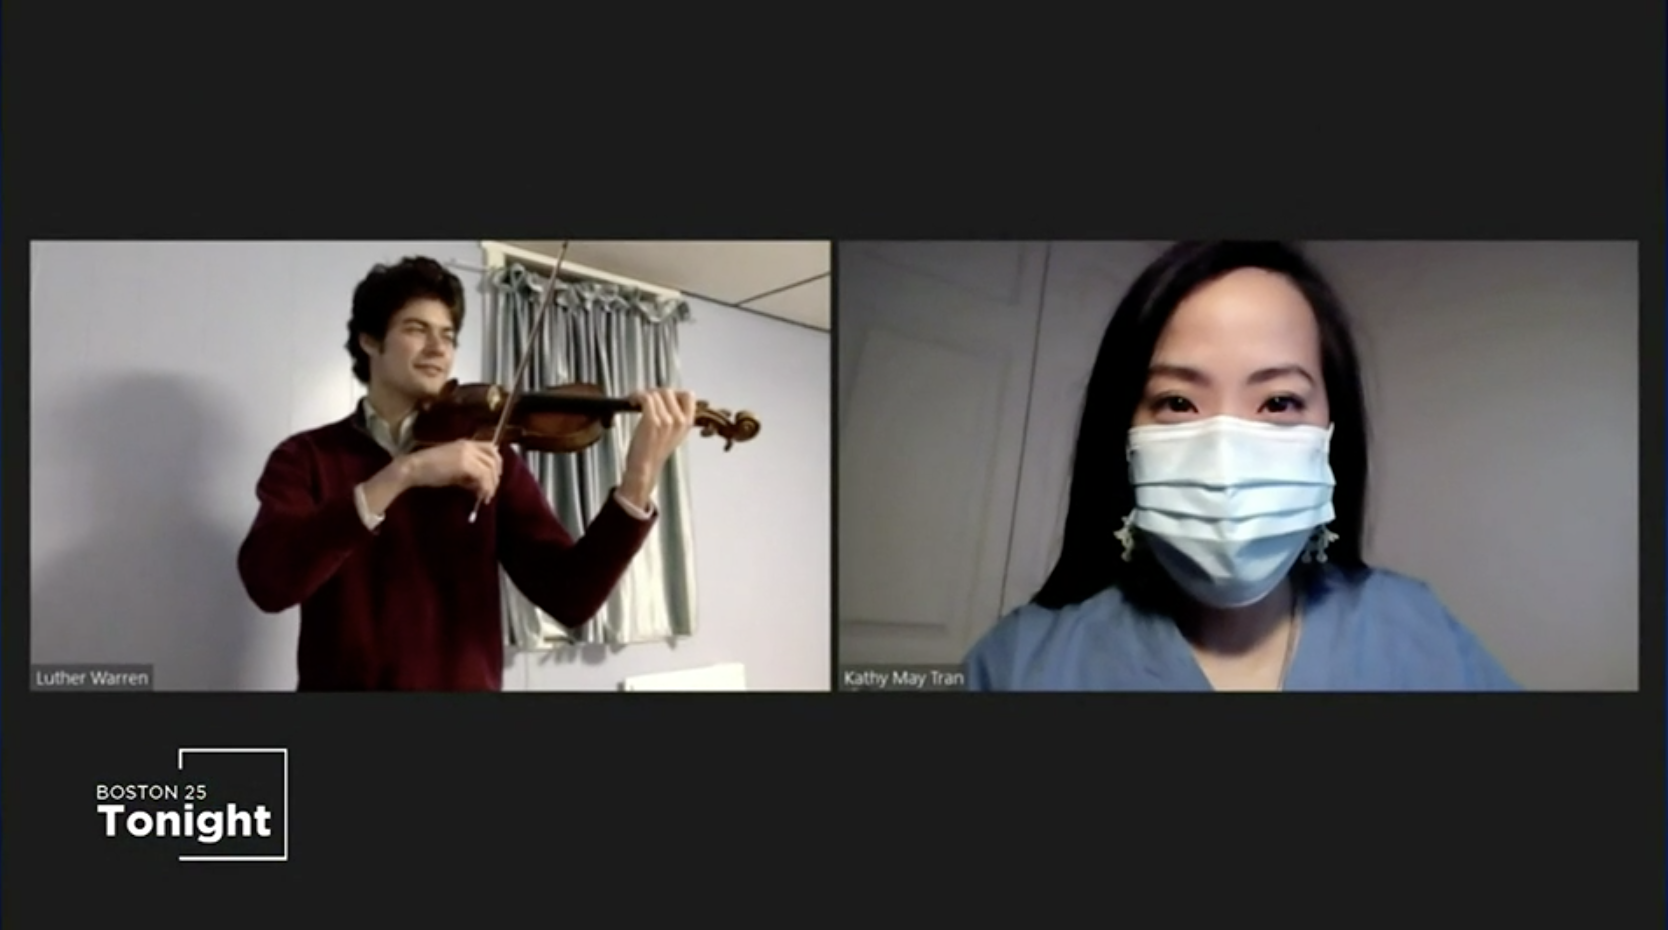 Luther Warren performs violin via Zoom, while Dr. Kathy May Tran watches while wearing a medical mask.